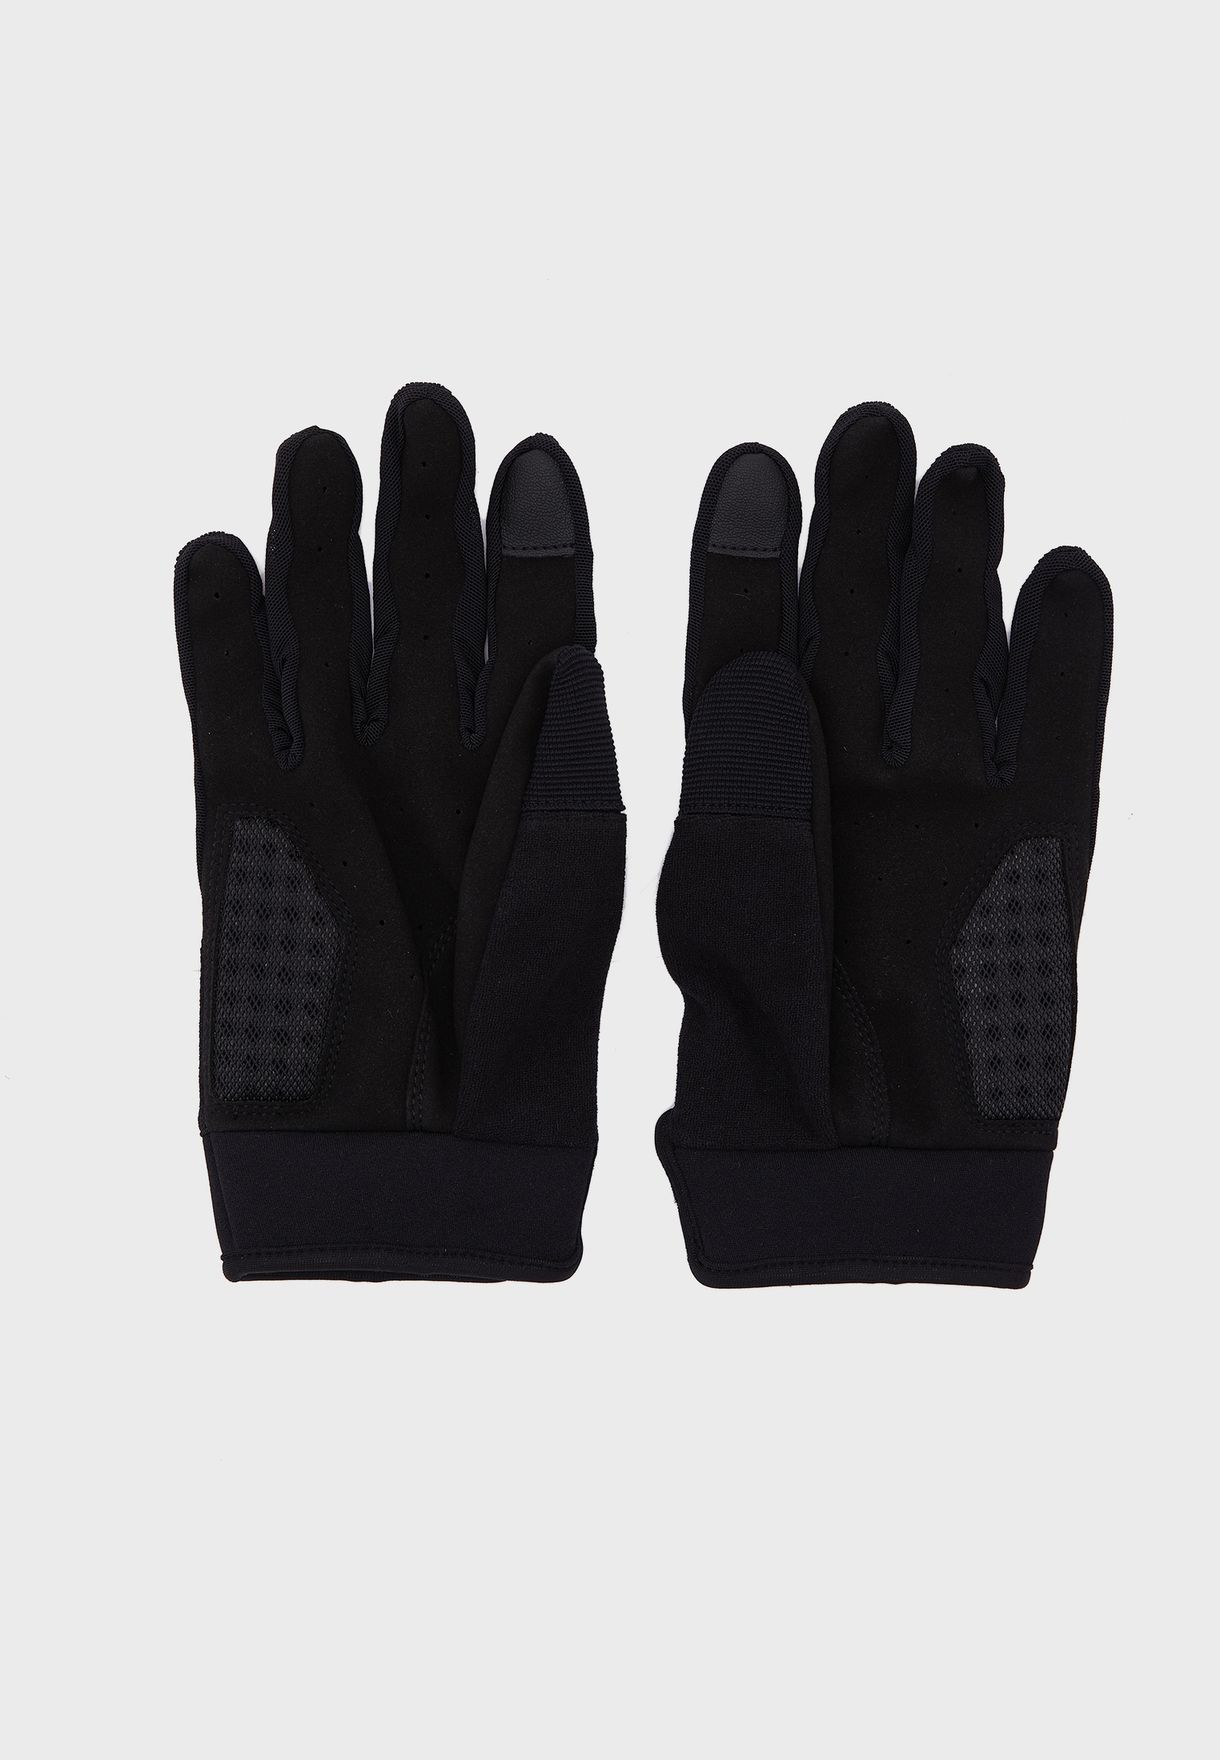 United By Fitness Athlete Gloves